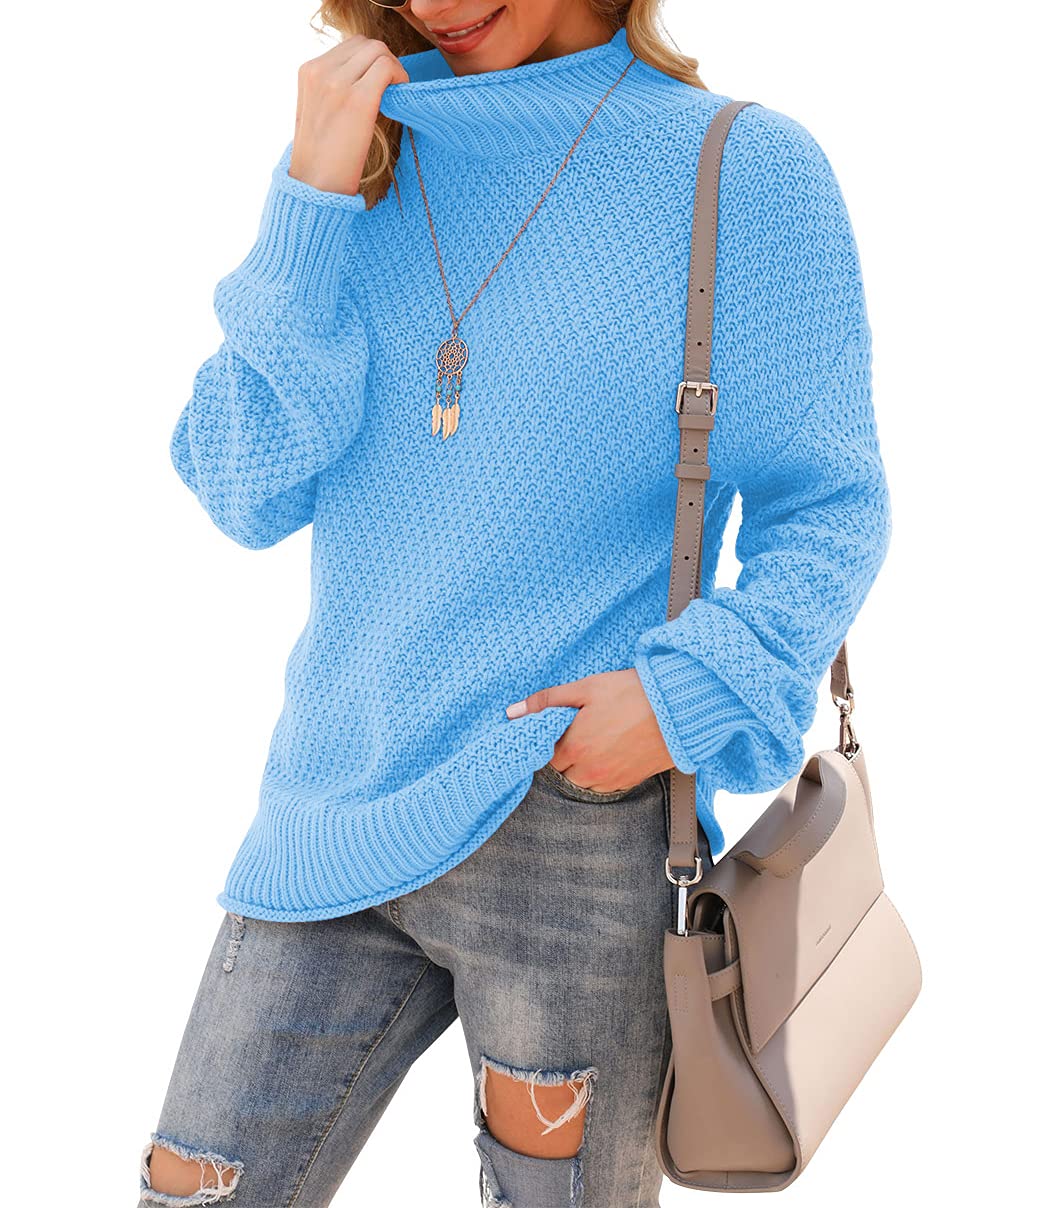 Jouica Womens Winter Long Batwing Sleeve Sweaters Turtle Neck casual comfy Pullover Jumpers Tops,Lake Blue,Small